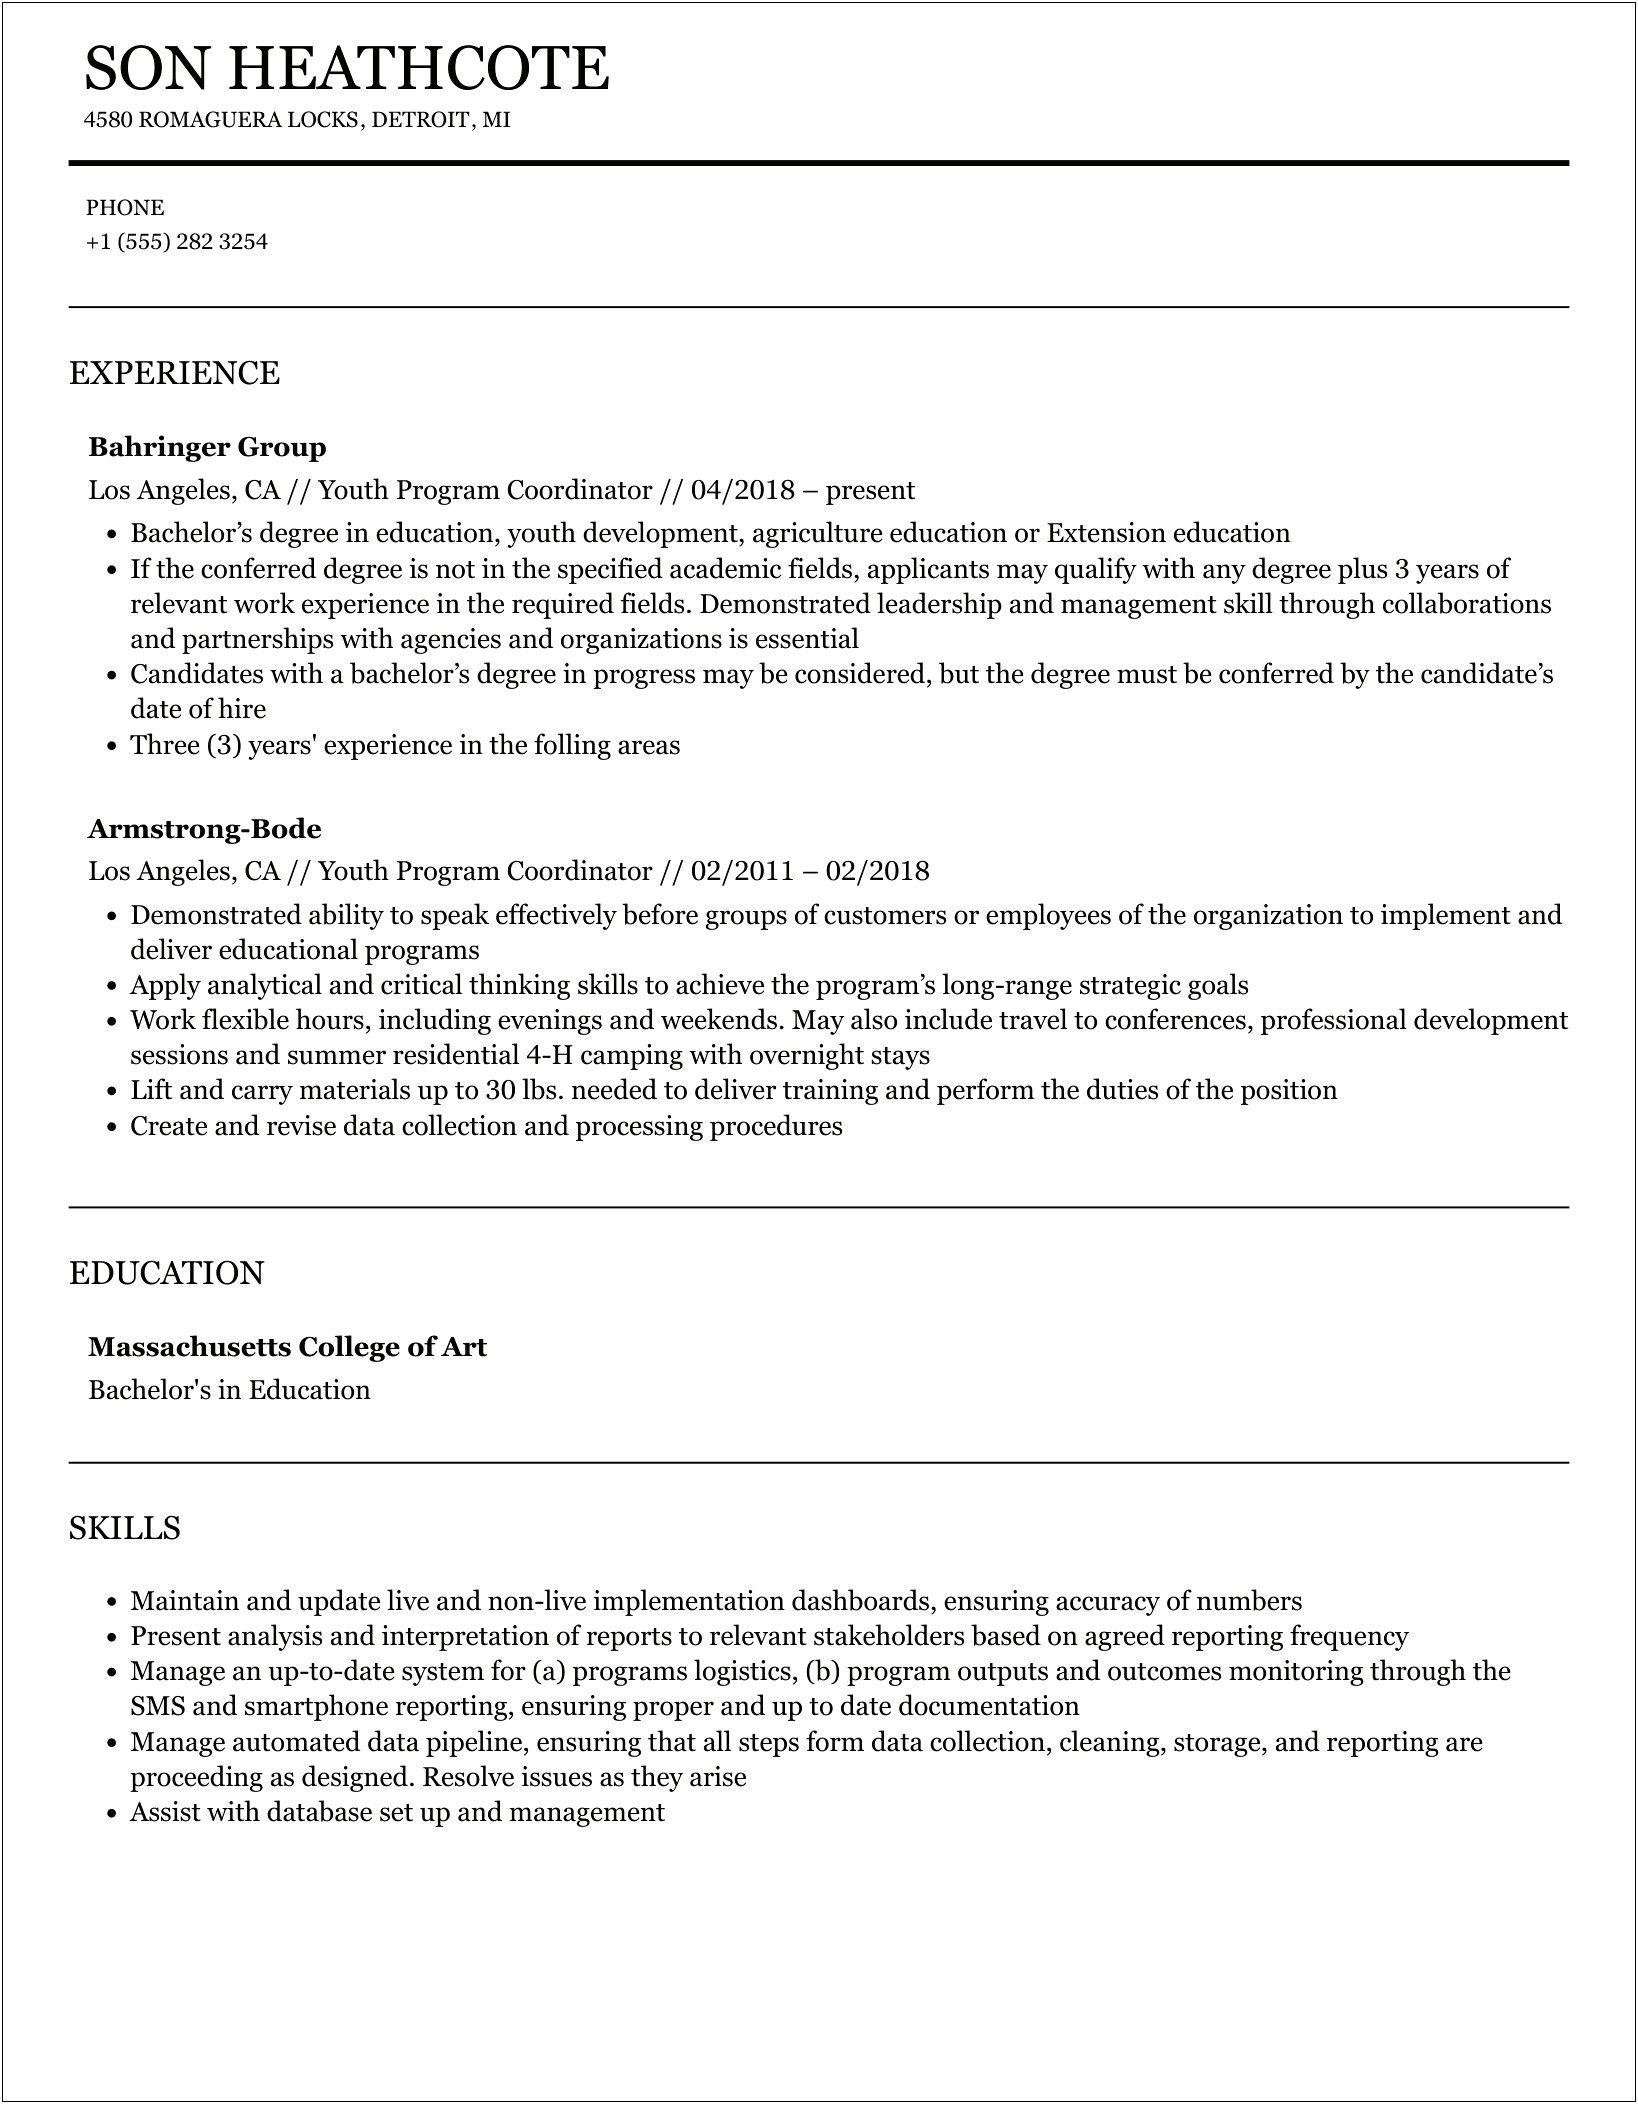 Resume Objective For Youth Program Coordinator